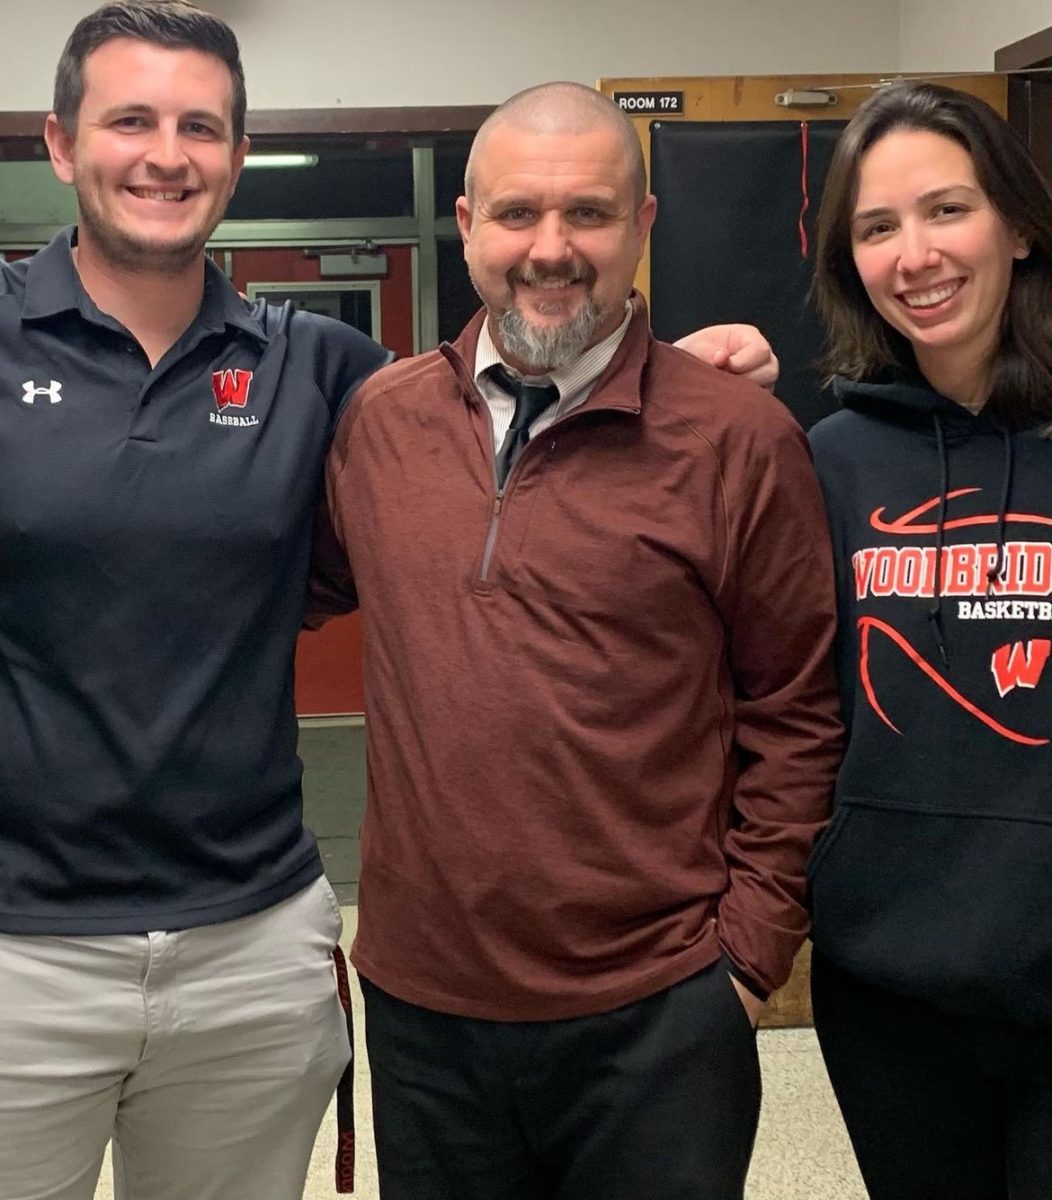 WHS Welcomes New Girls’ Basketball Coach for 23-24 Season